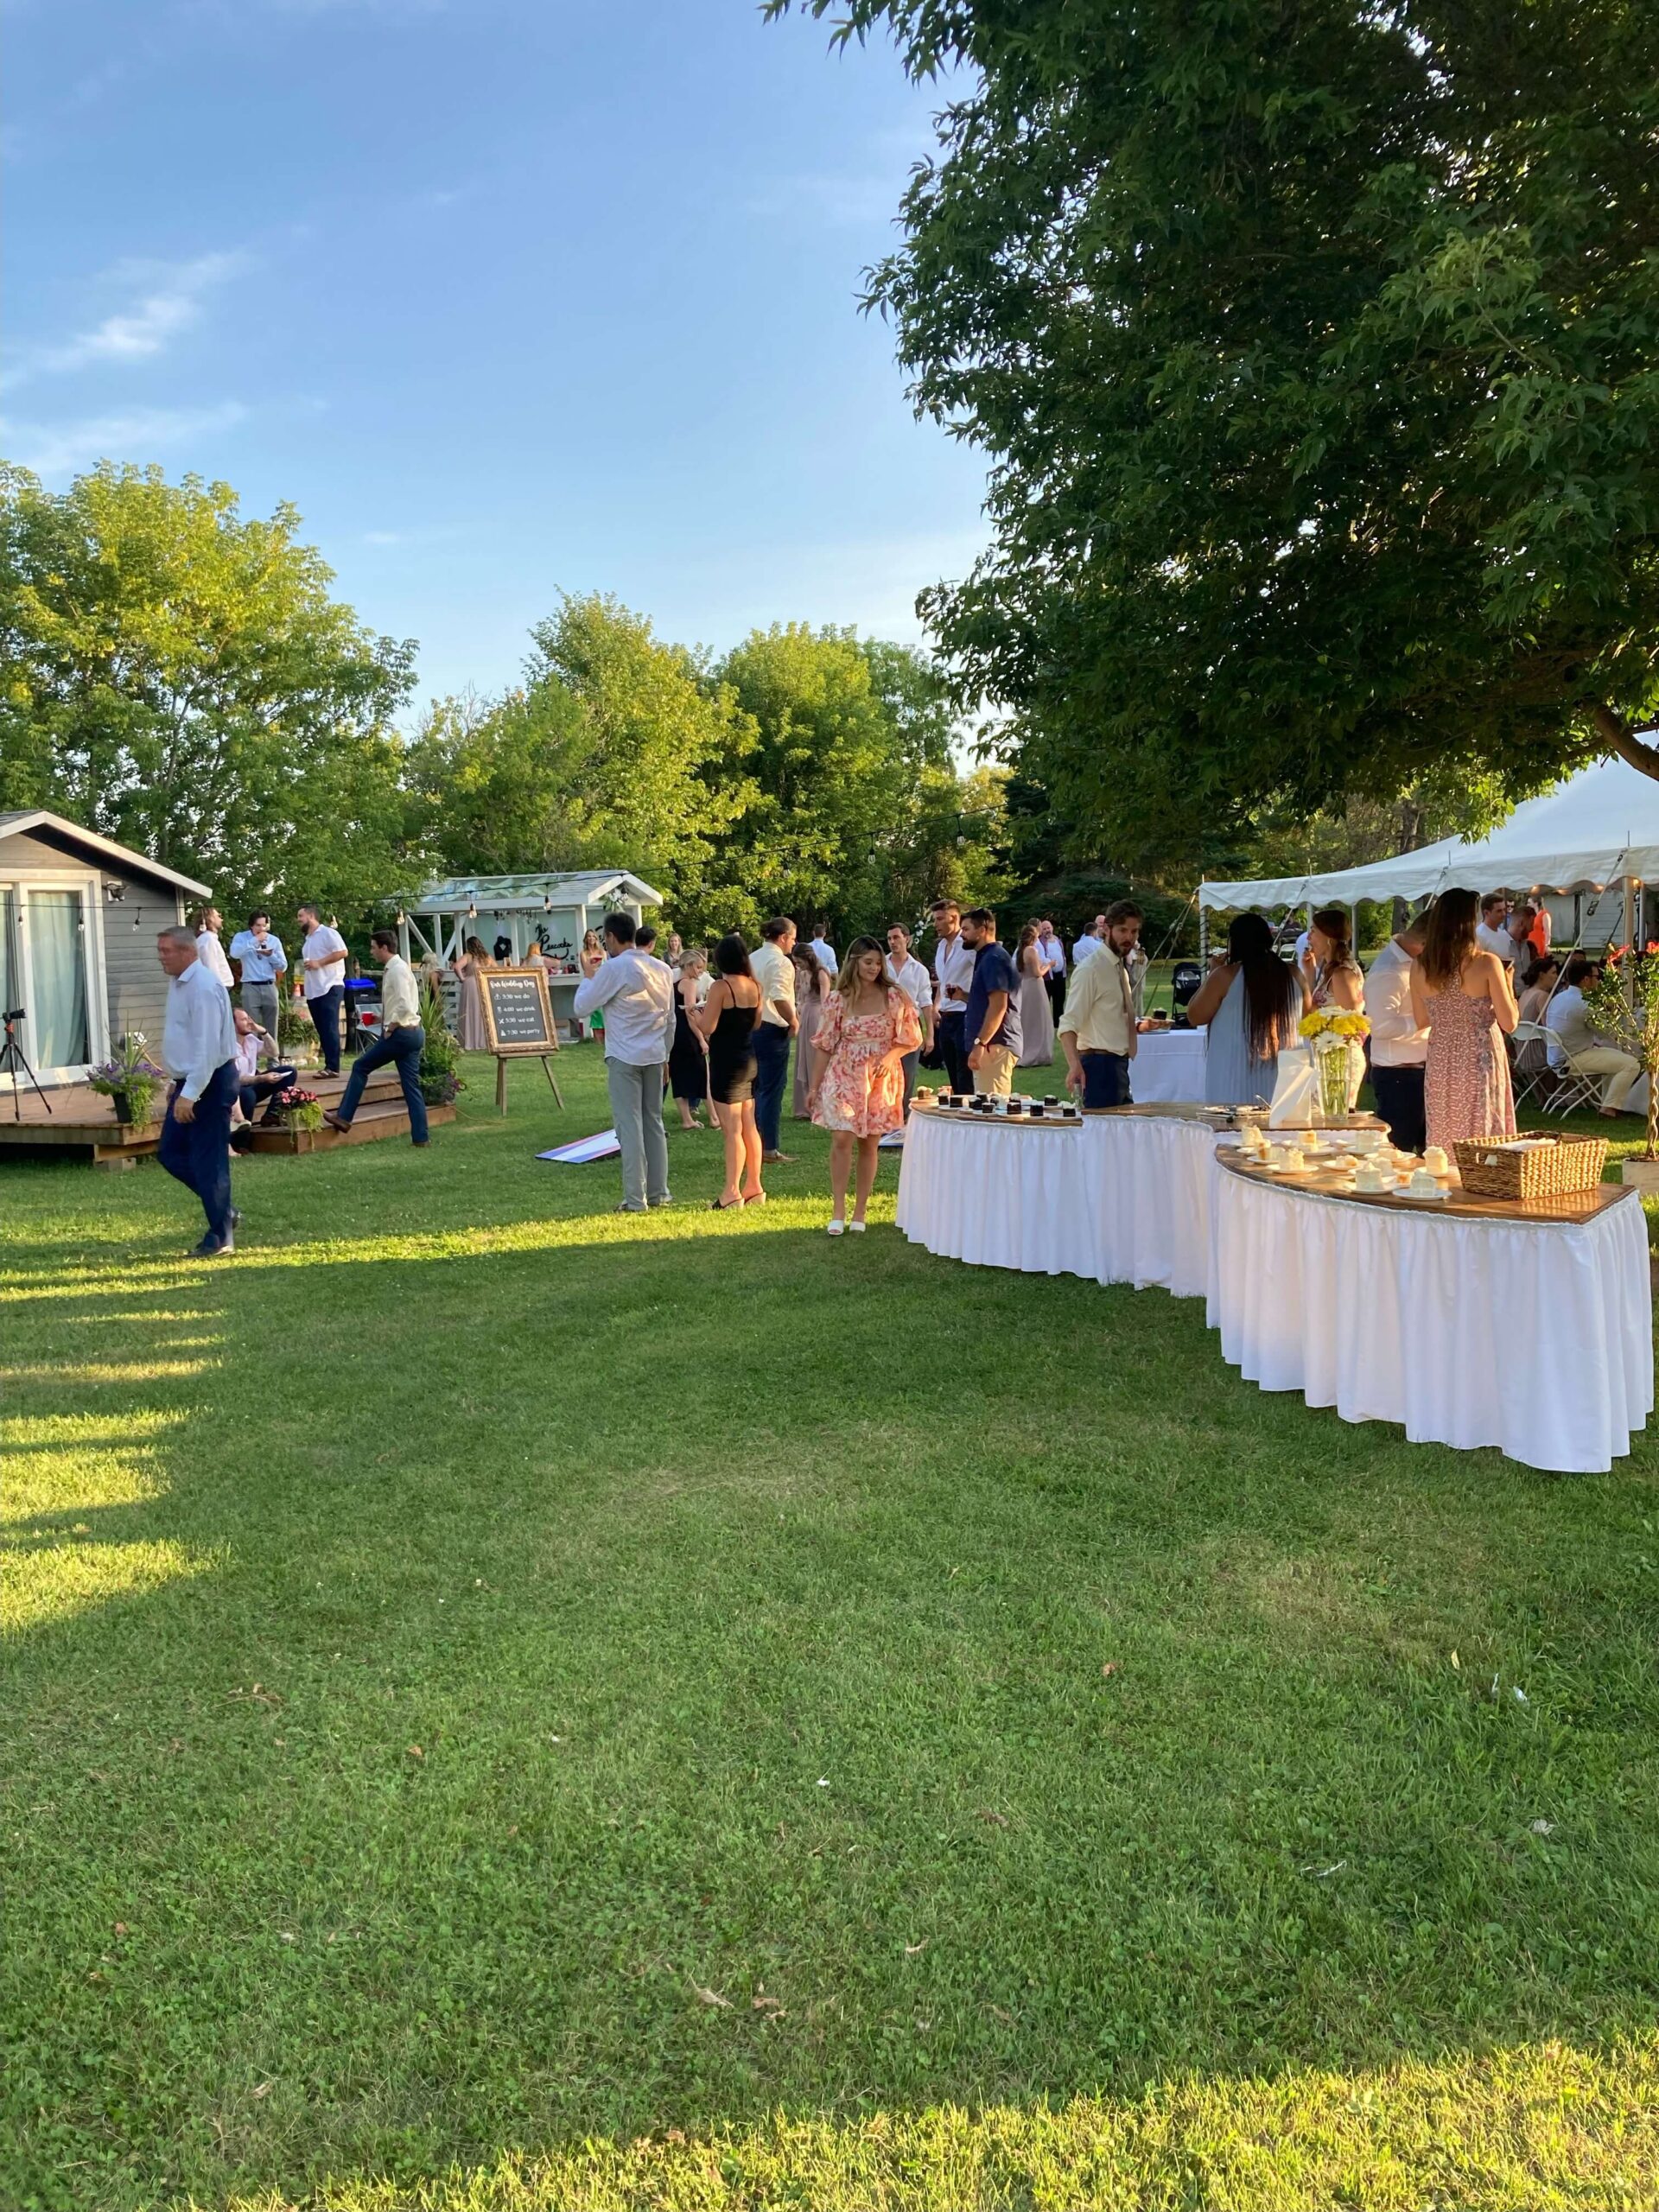 Guests at this wedding near Washago were treated to a gorgeous buffet of prime rib, chicken and our special sides.